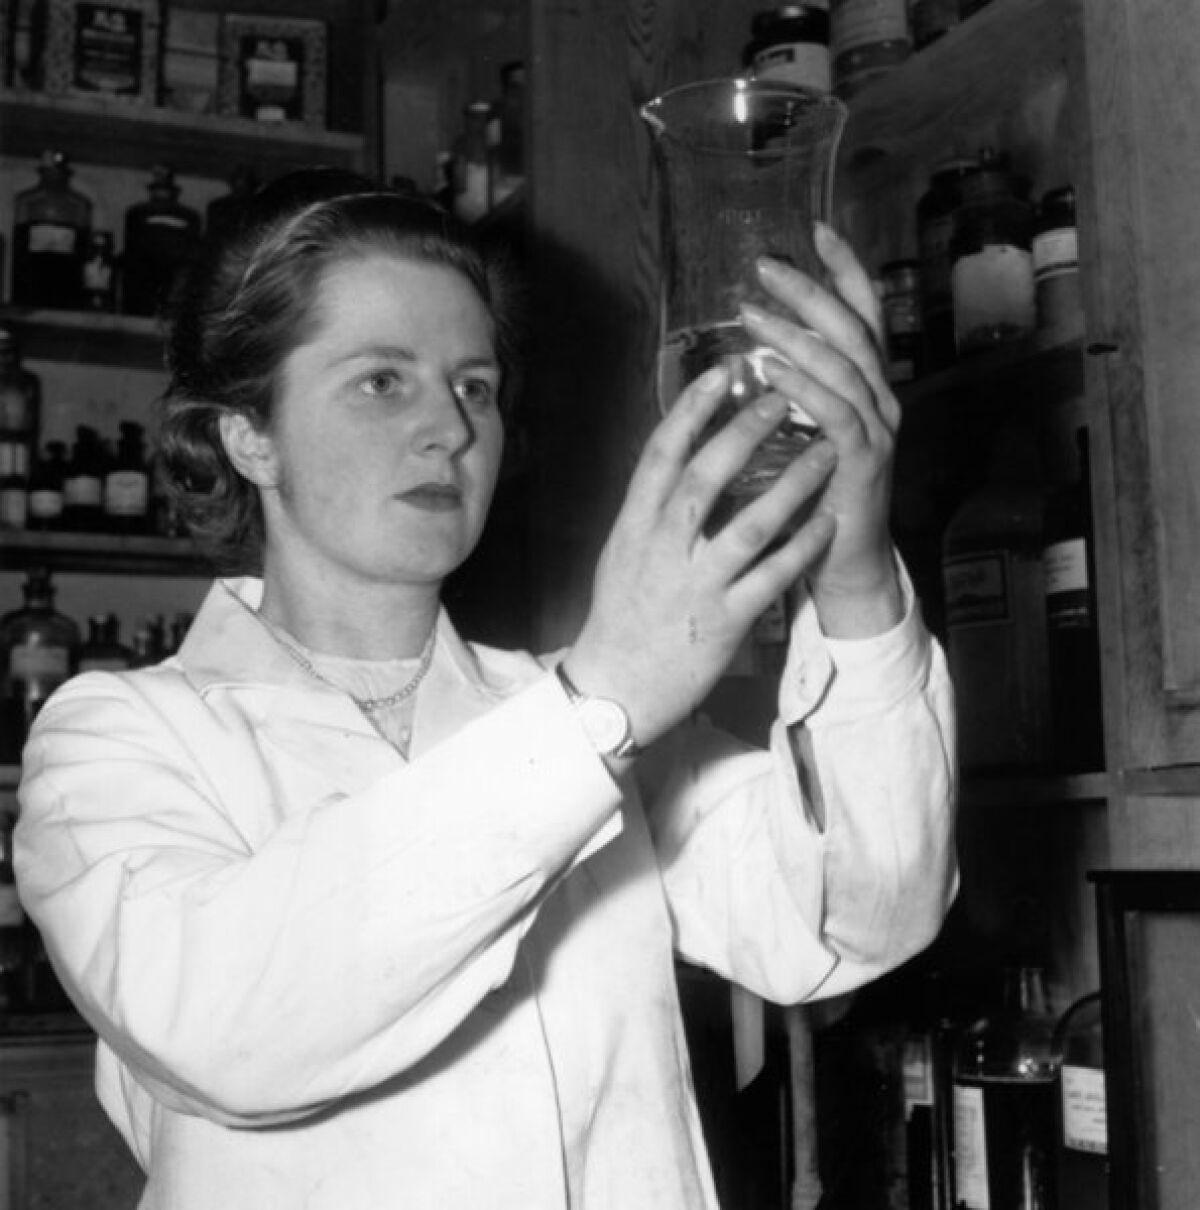 Margaret Thatcher studied chemistry at Oxford and was a food research scientist before pursuing a legal career.